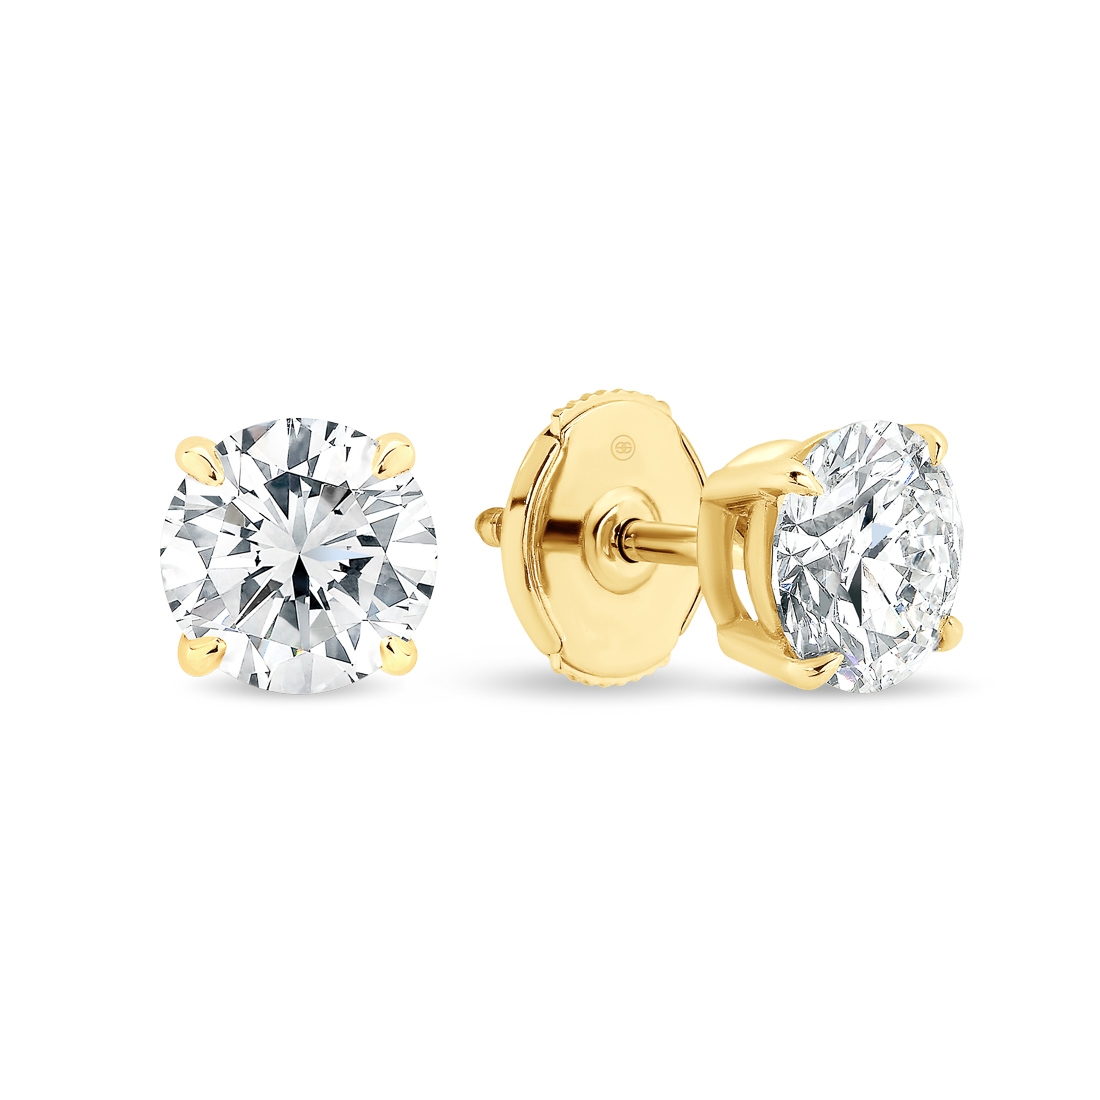 Gregory Classic Earrings 0.50ct Yellow Gold - K26-0.50 YG